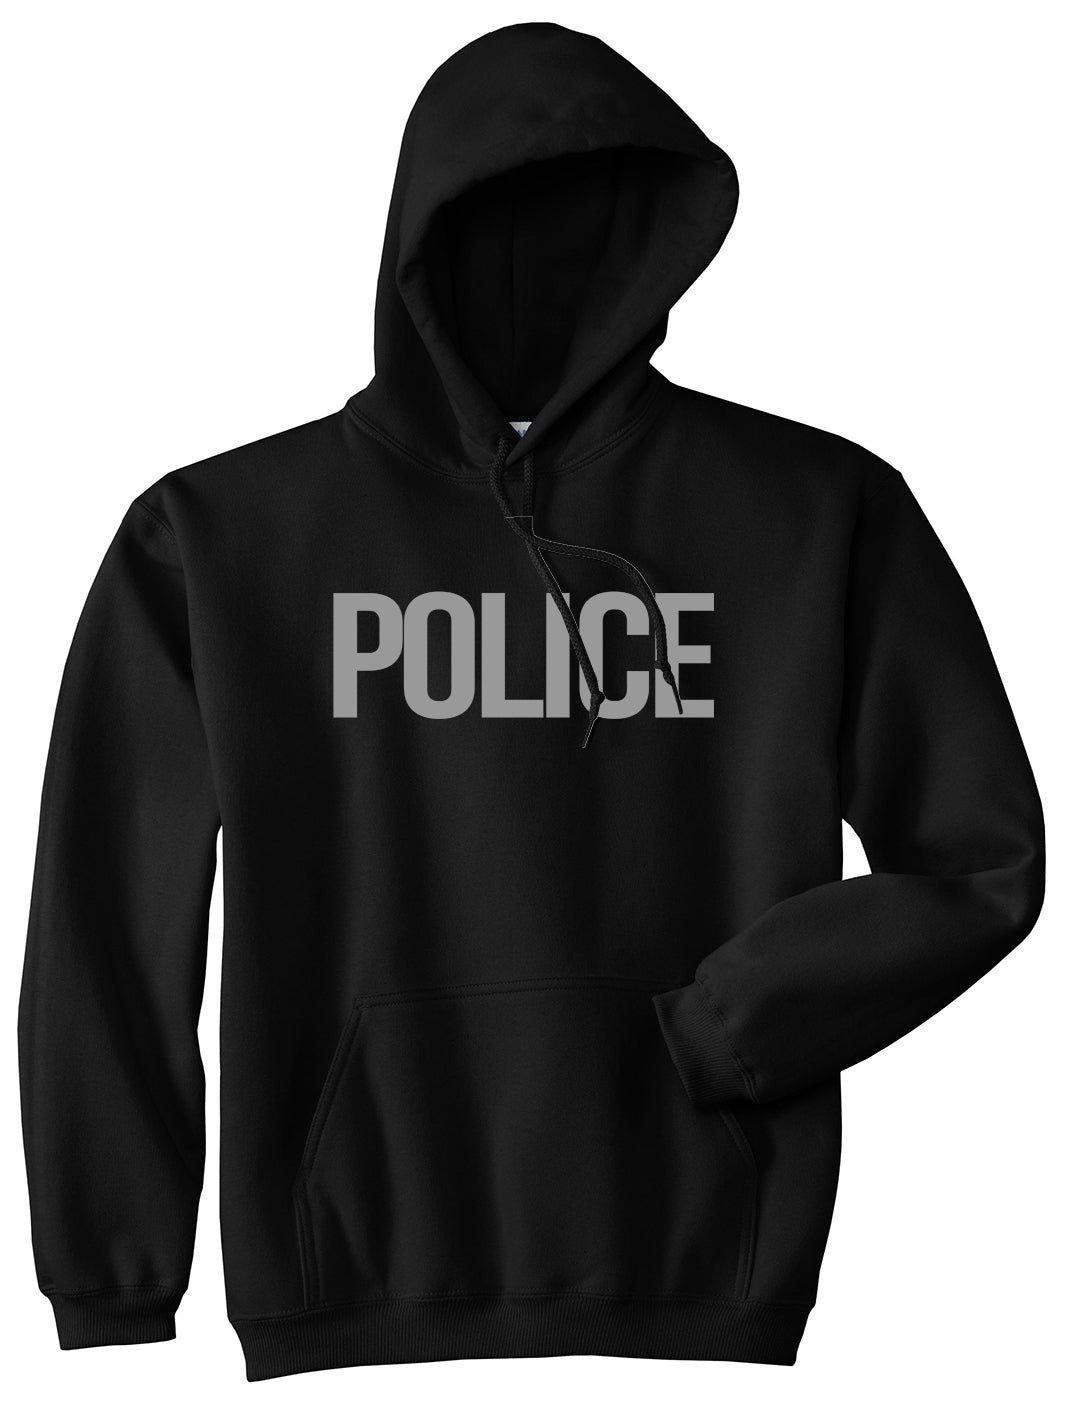 Police Uniform Cop Costume Mens Pullover Hoodie Black by Kings Of NY